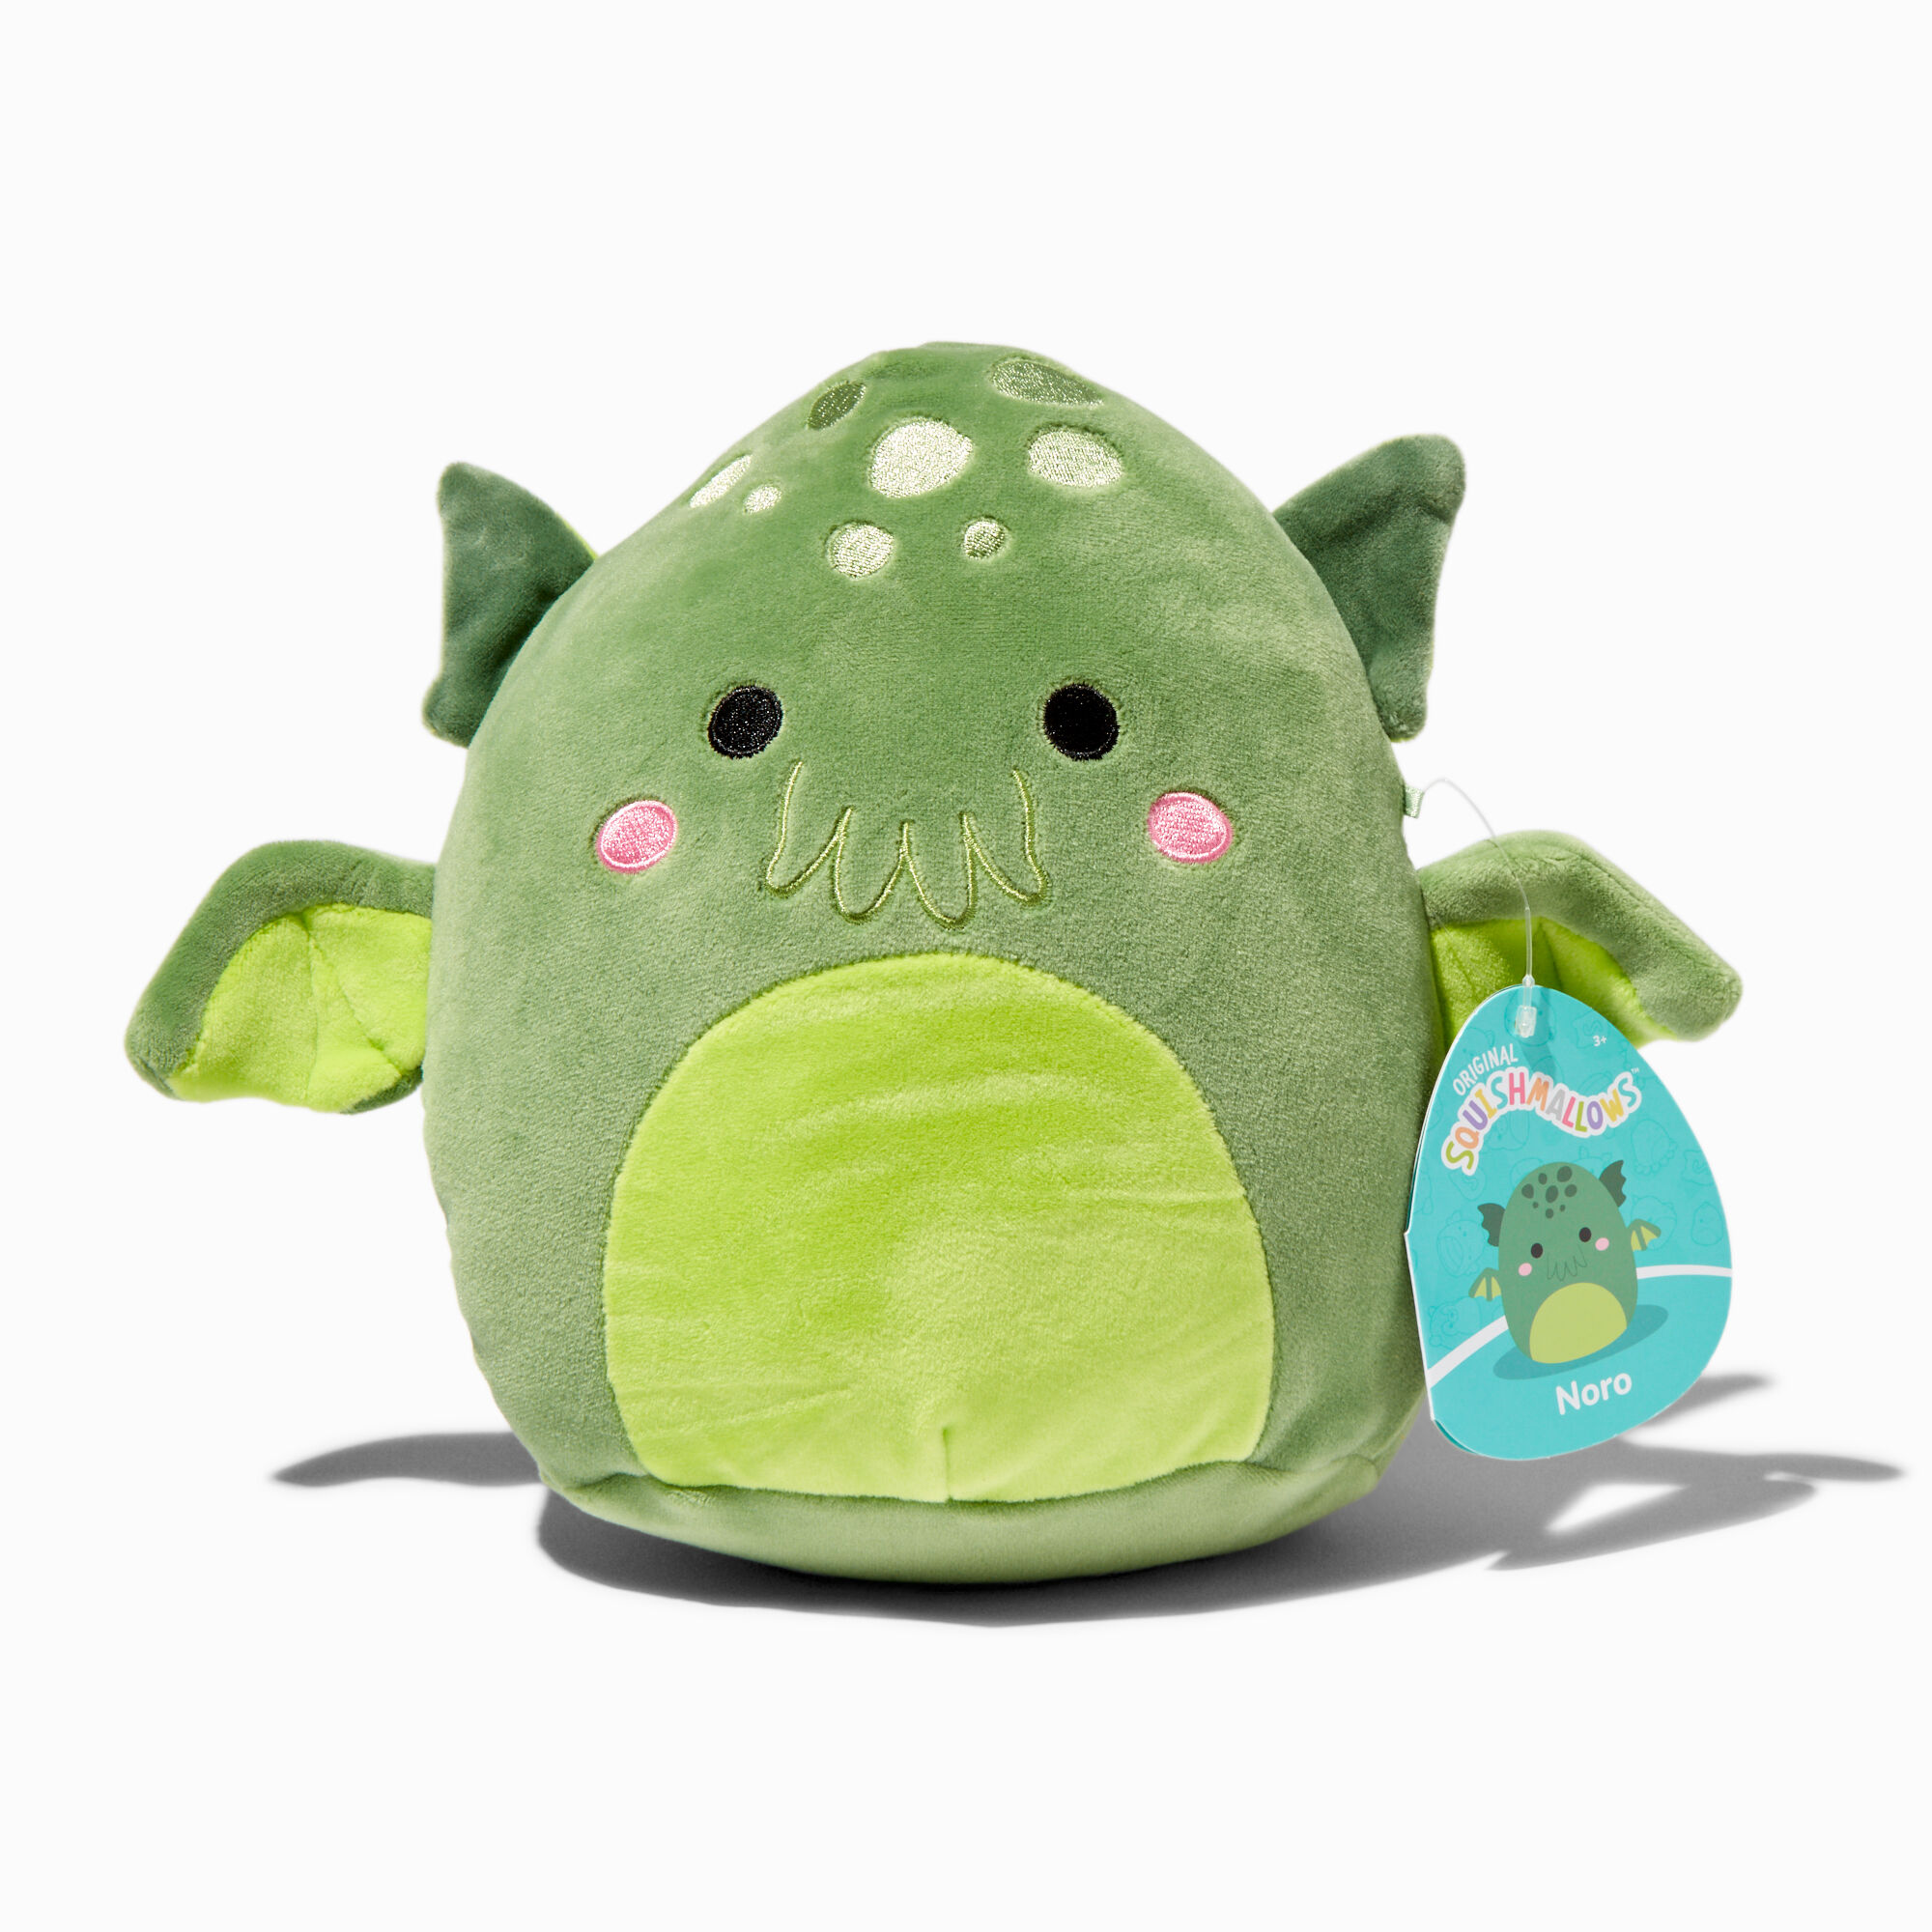 View Claires Squishmallows 8 Noro Soft Toy information